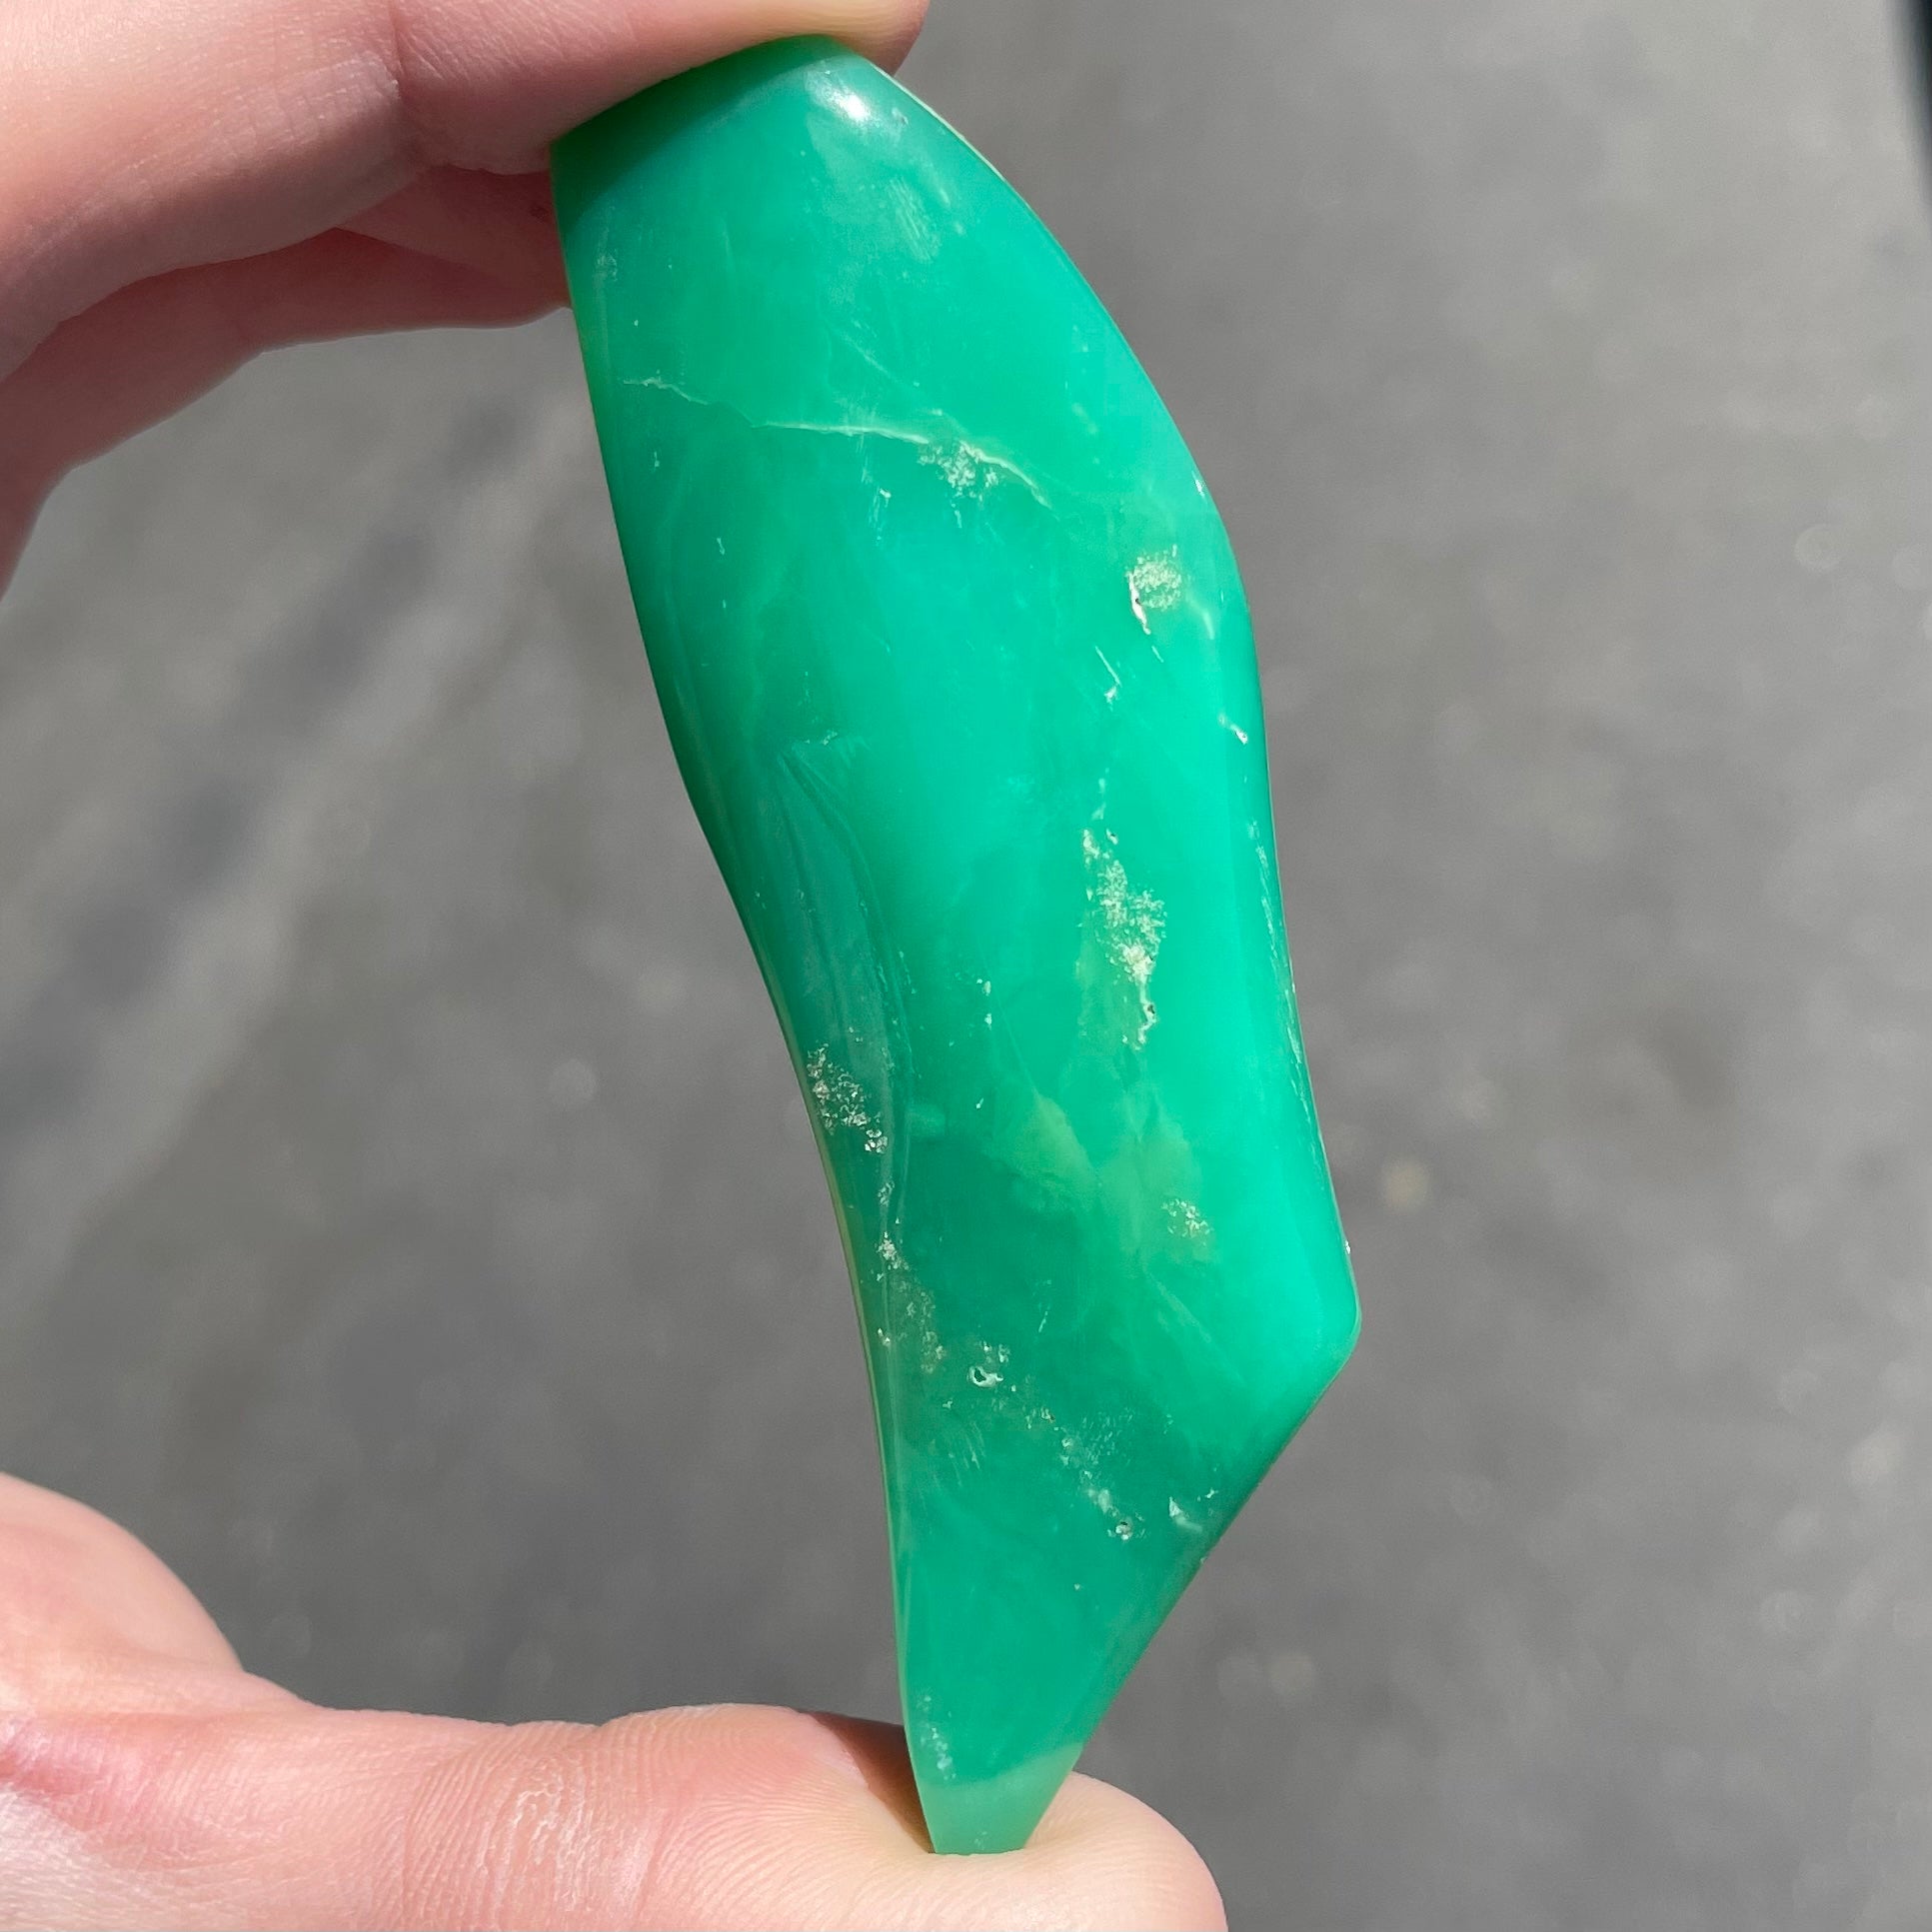 A polished, freeform shape chrysocolla specimen that measures 3.3 inches by 1 inch.